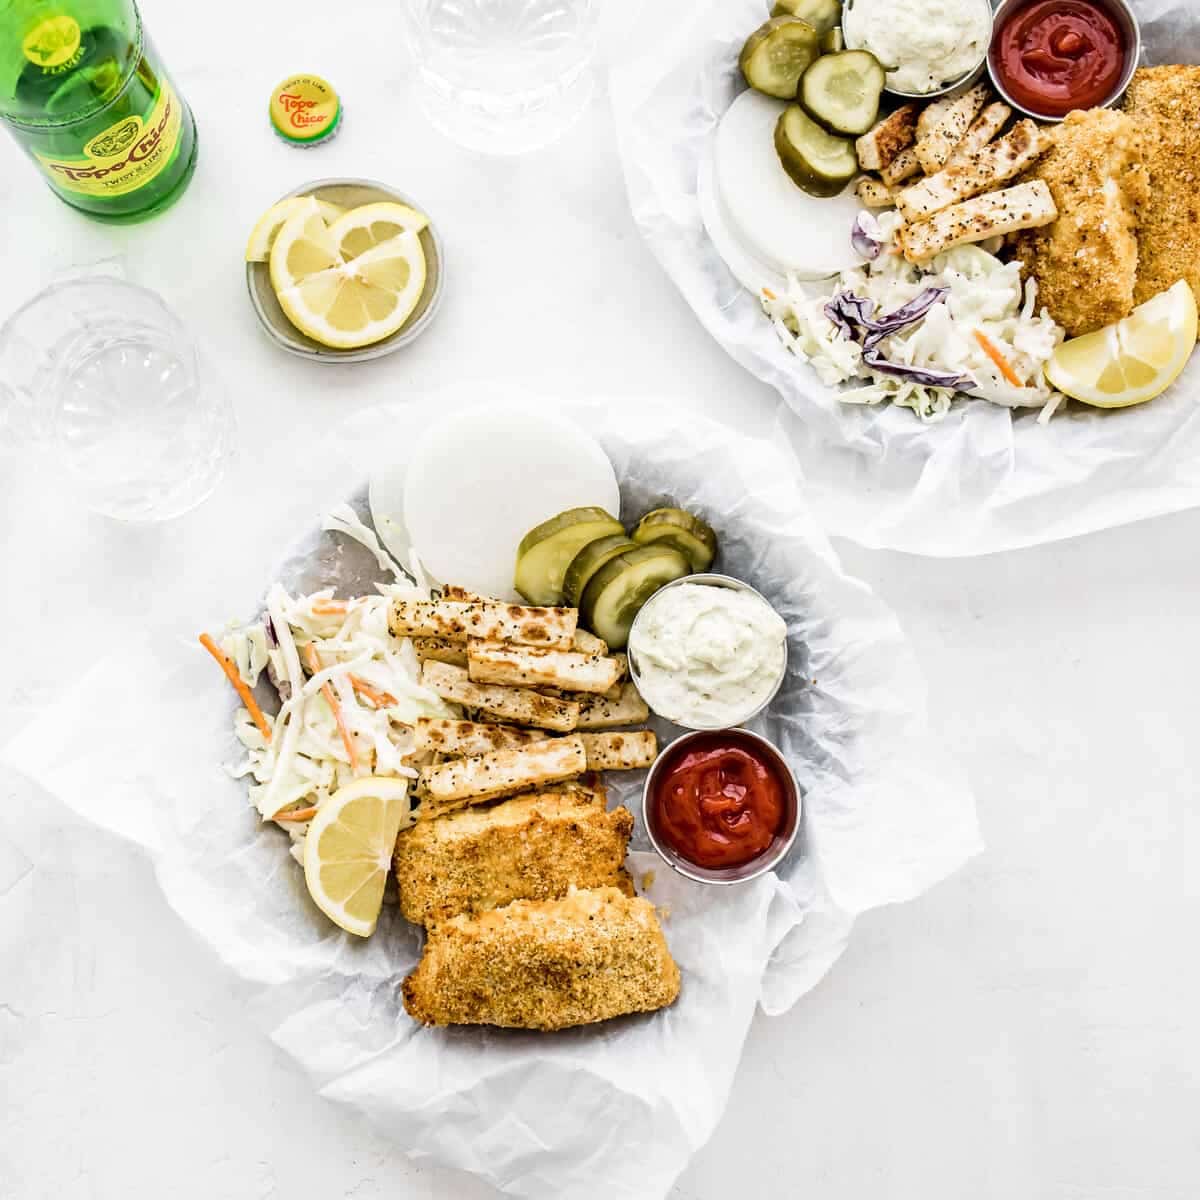 Keto fish and chips (whole30)